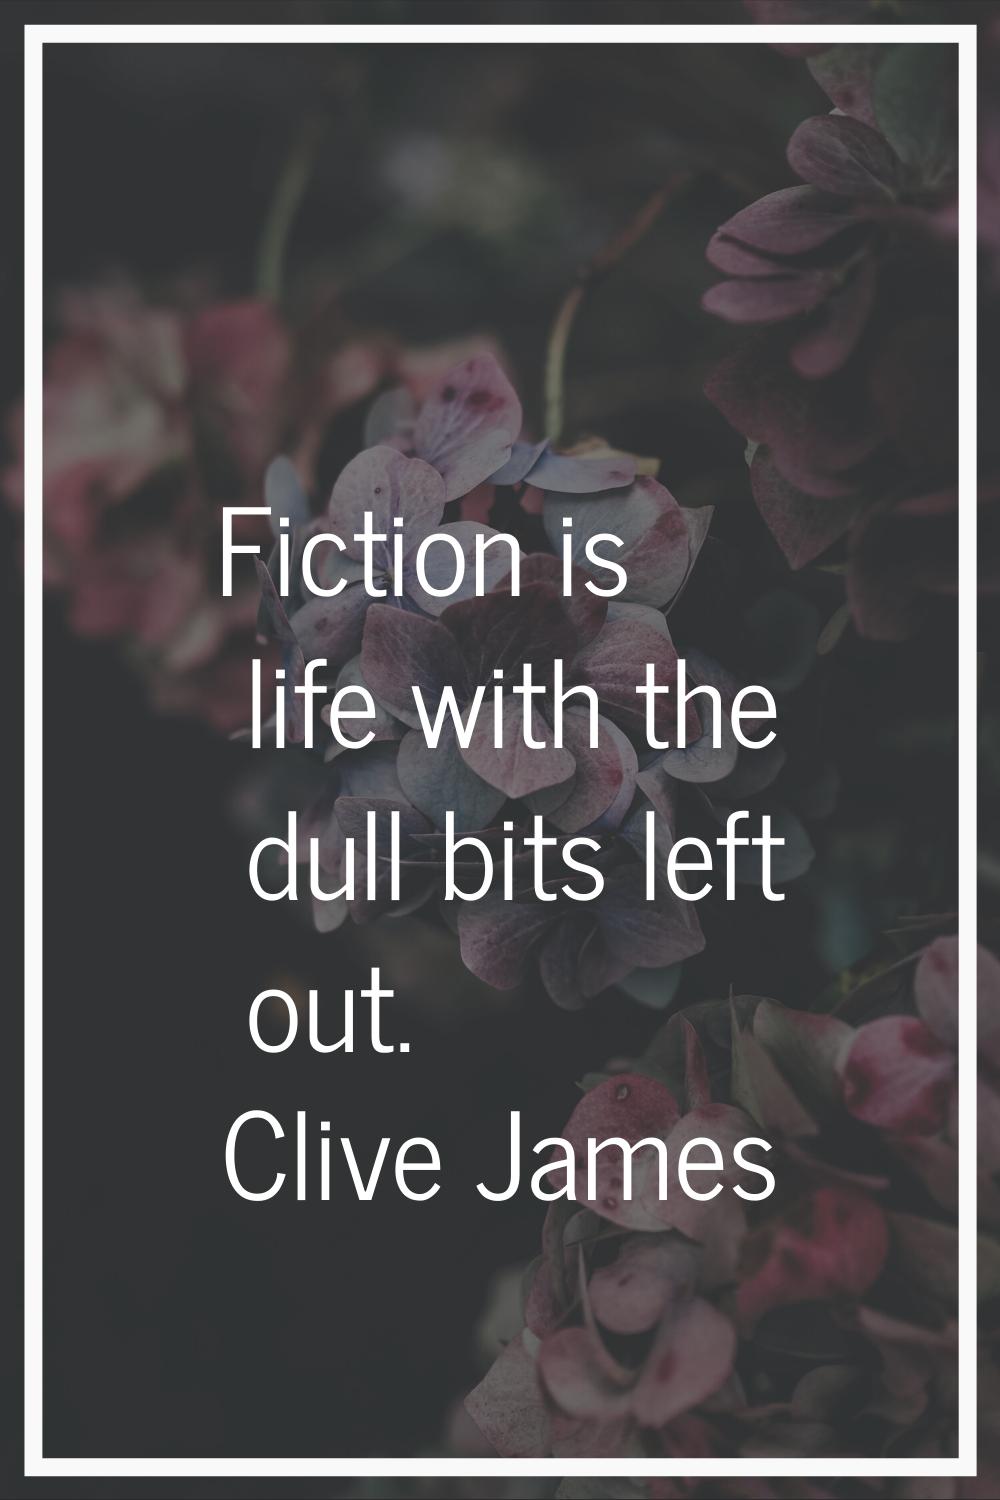 Fiction is life with the dull bits left out.